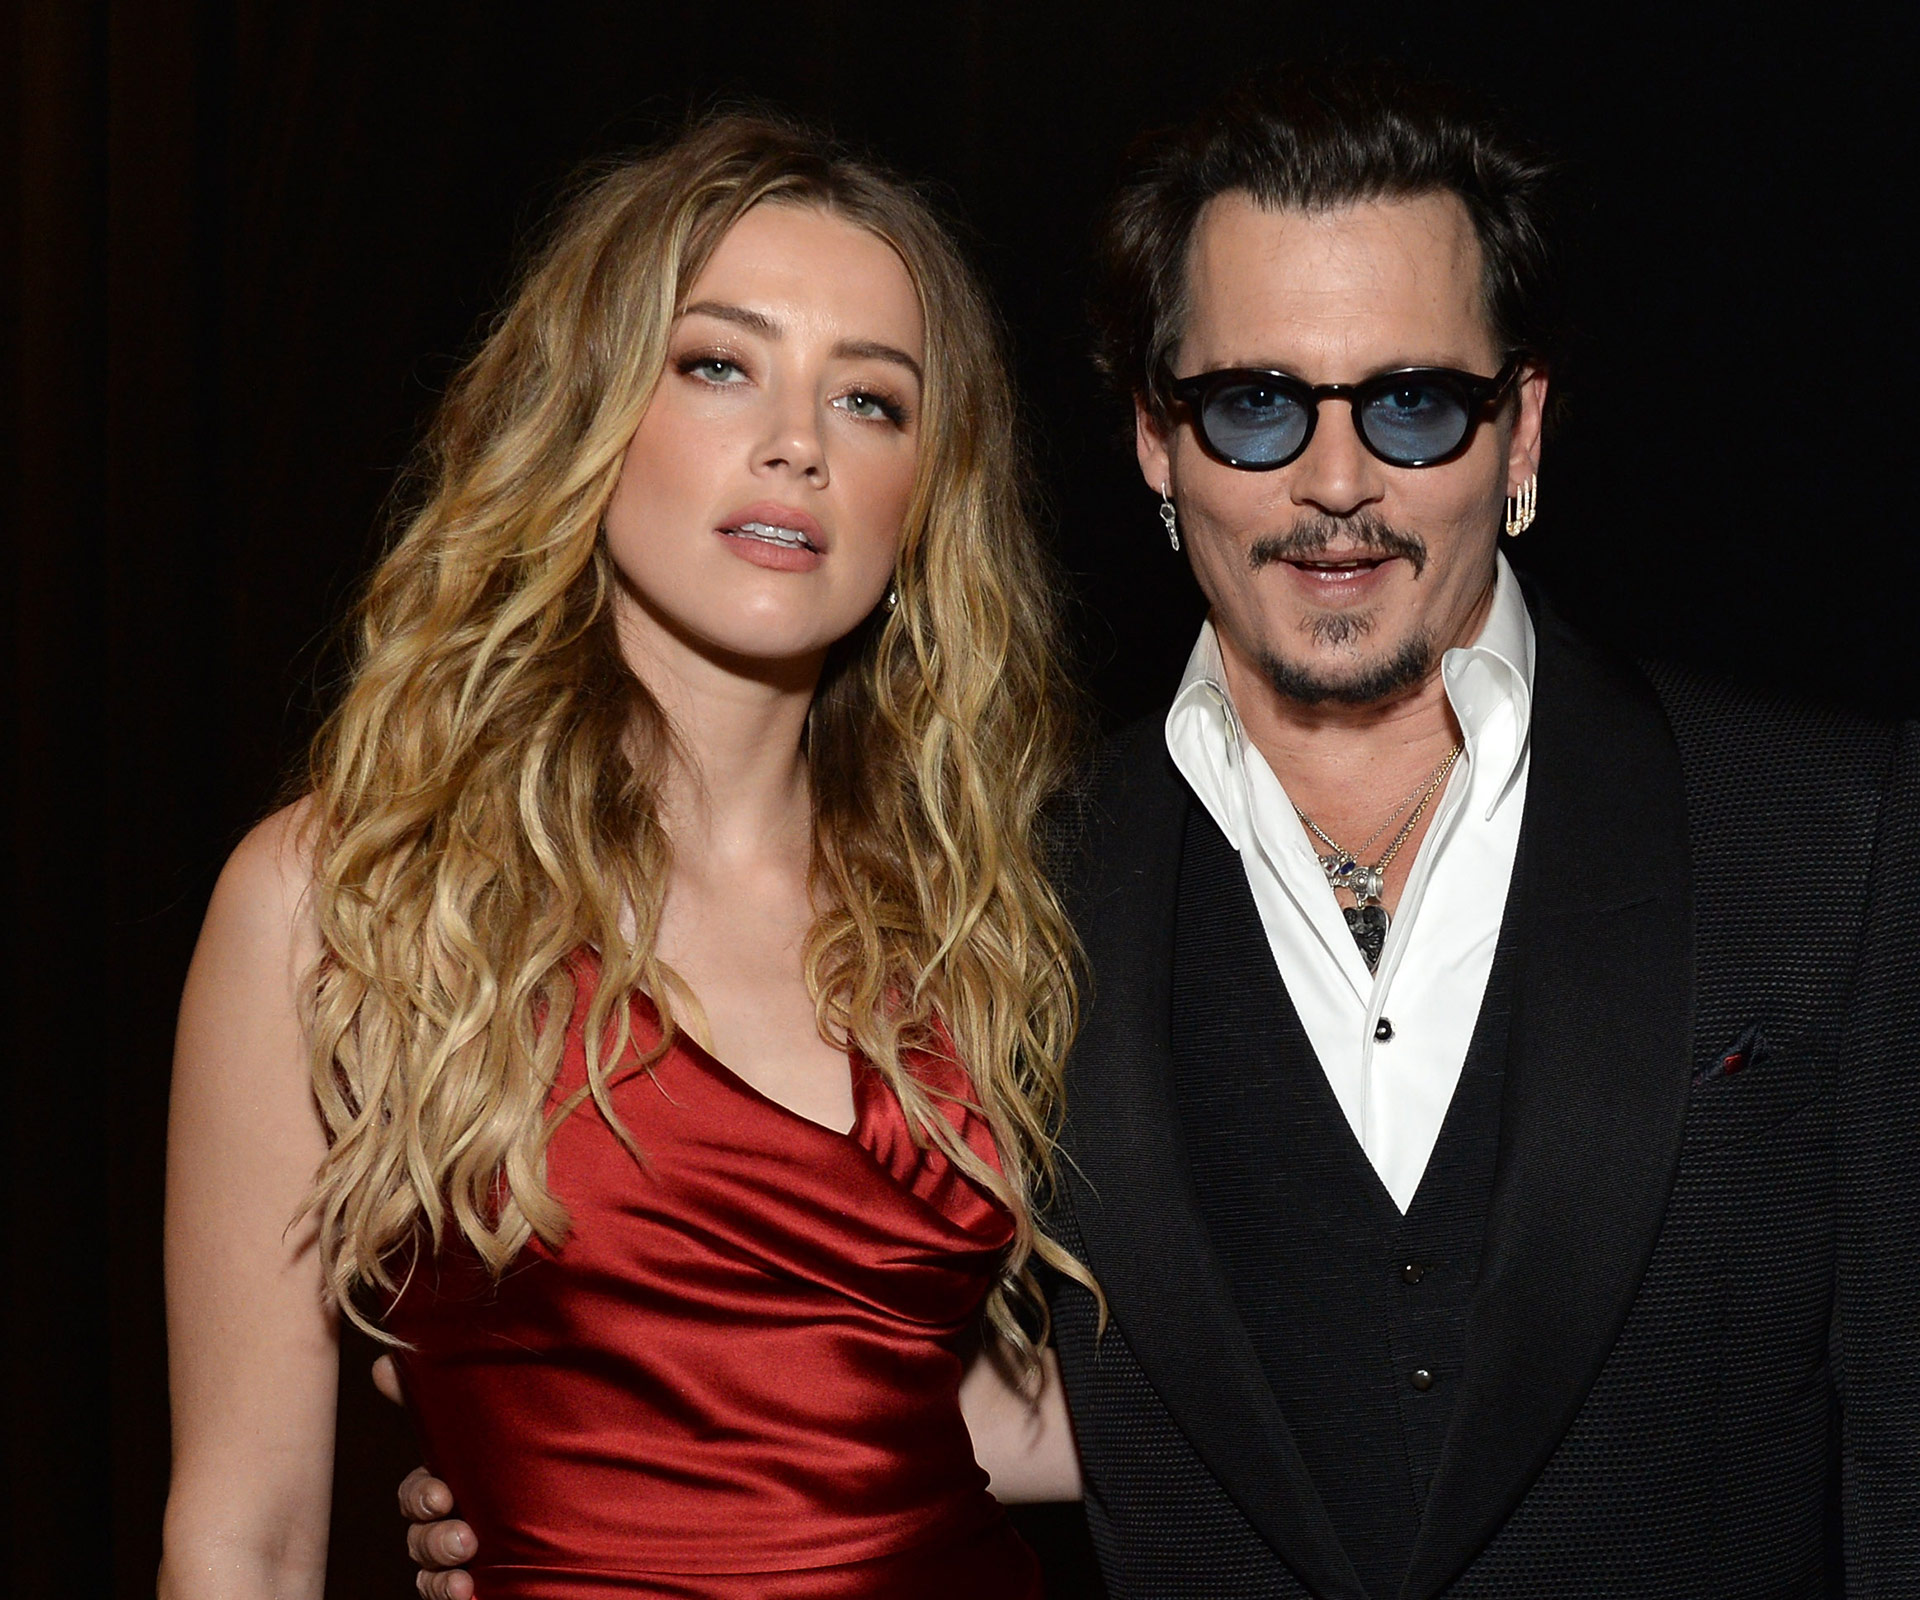 Amber Heard’s lawyers retract statement on her divorce